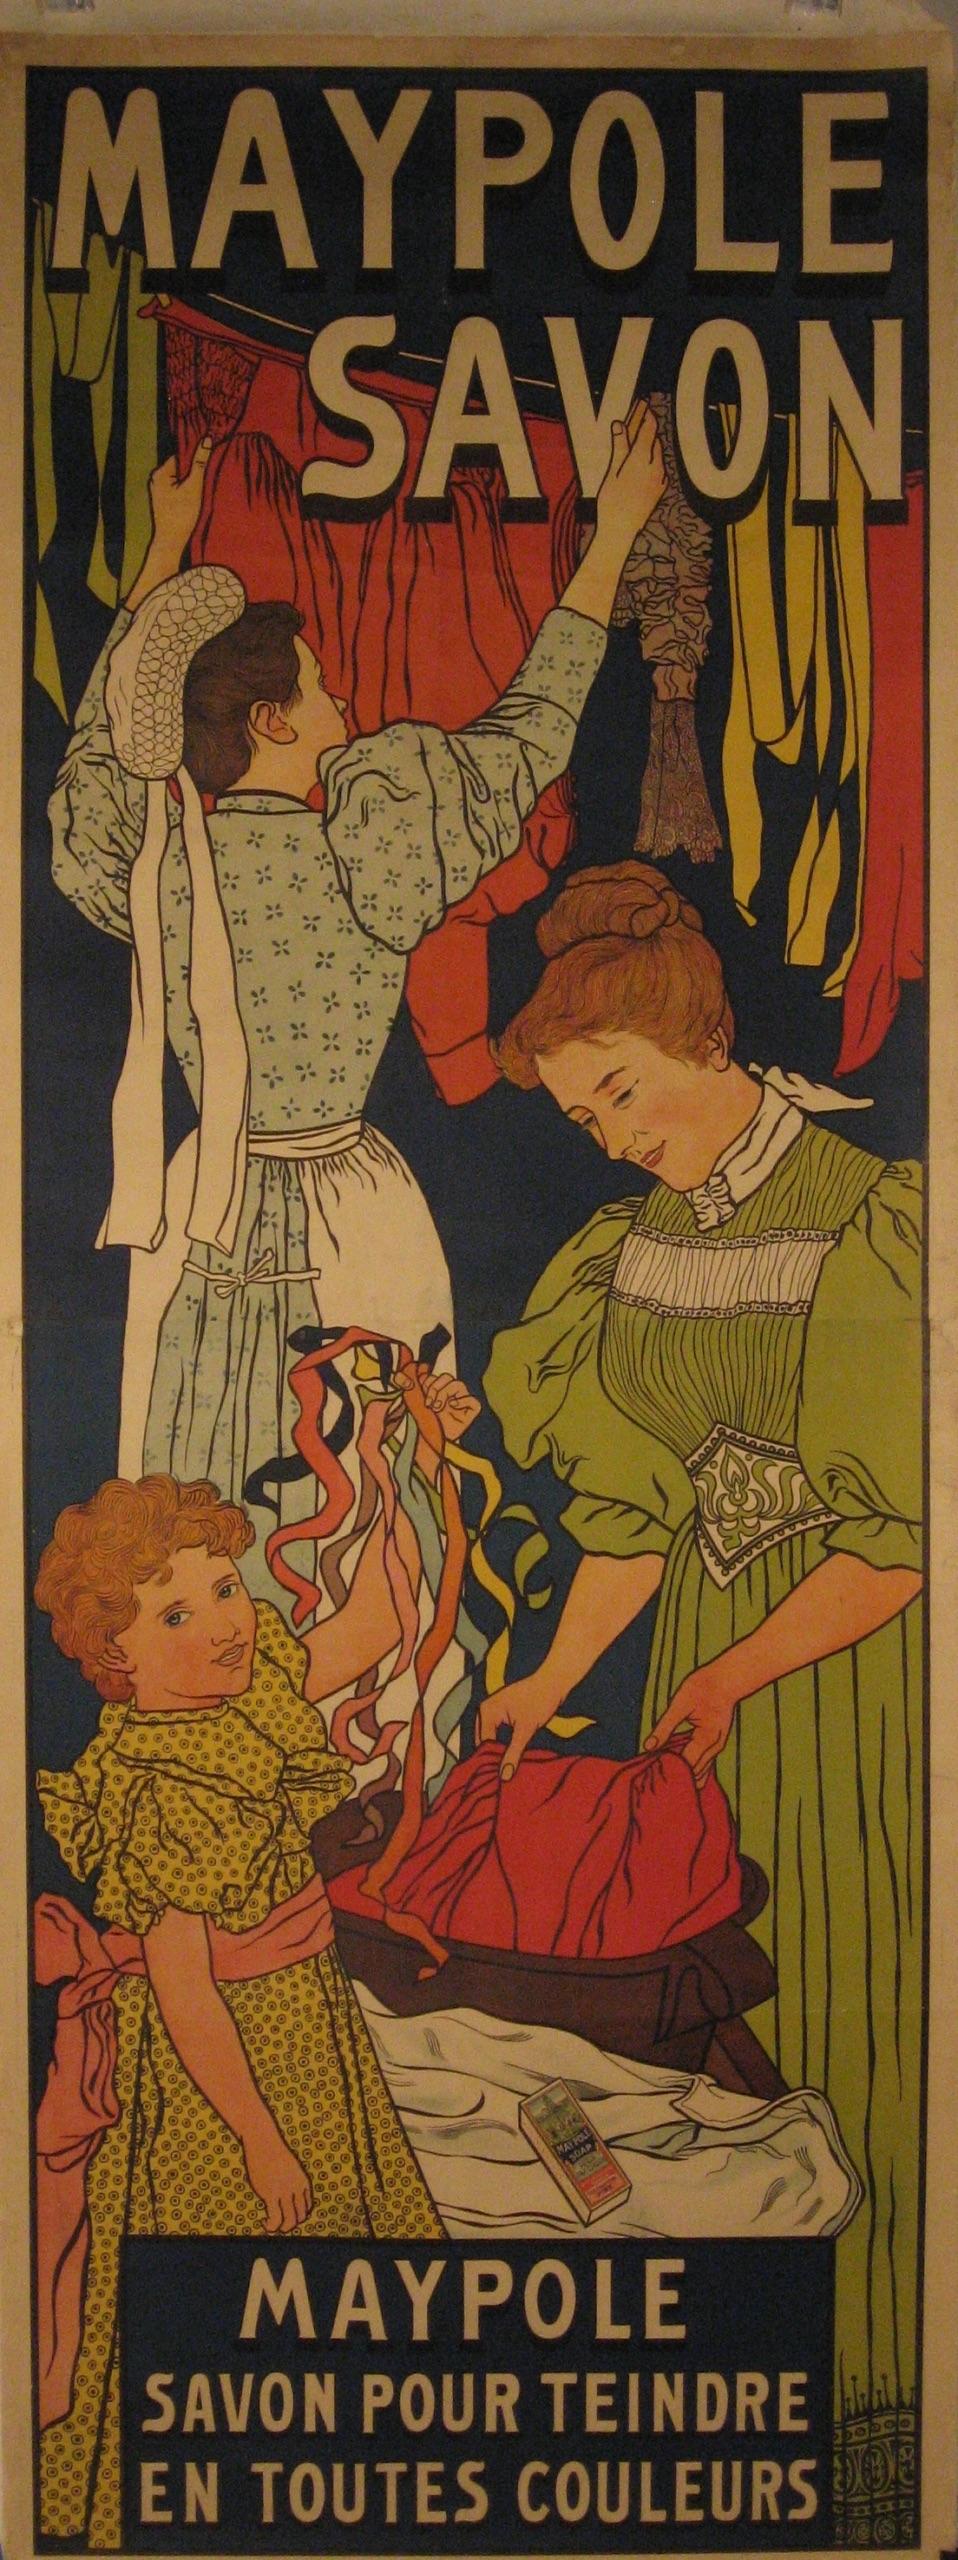 Artist: Johann Georg van Caspel (Dutch, 1870-1928)

Date of Origin: 1896

Medium: Original Offset  Lithograph Vintage Poster

Size: 30” x 82”

 

Oversized poster advertising Maypole Soap – a fabric dye that will color your clothing any shade of the